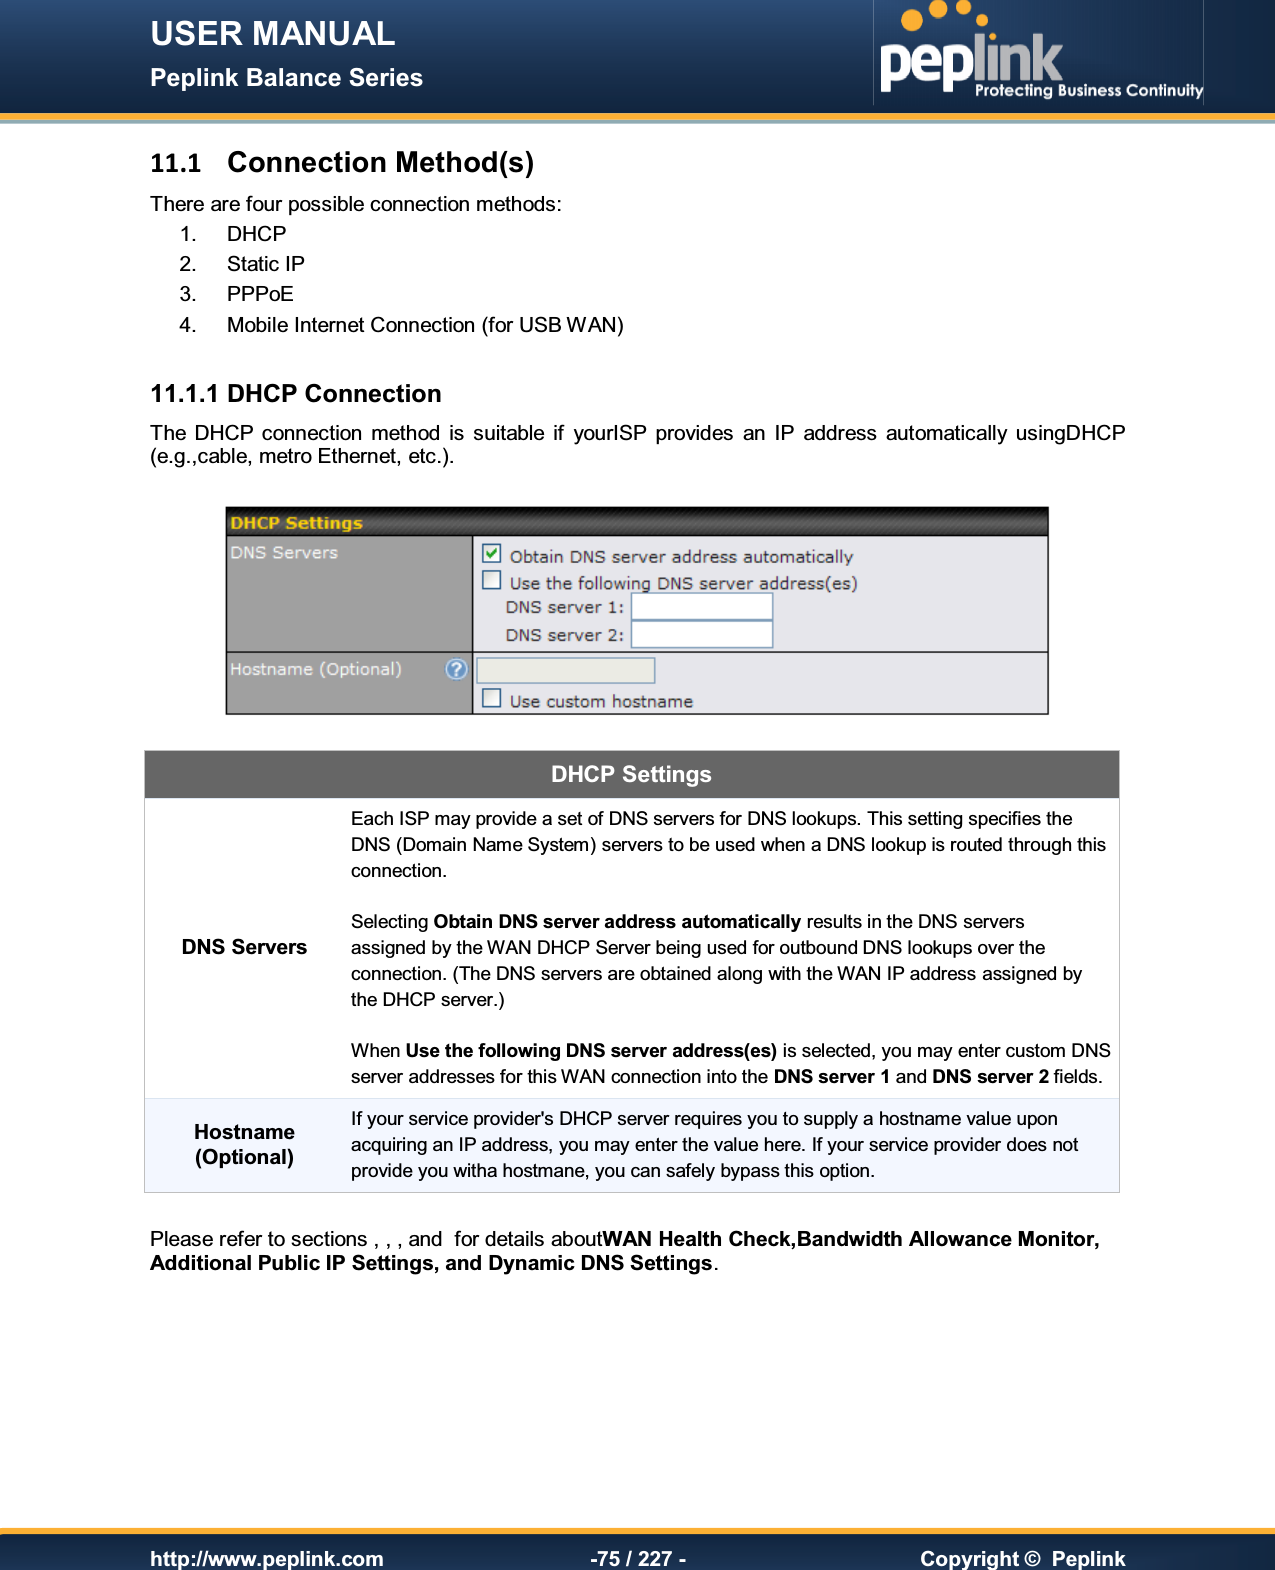 USER MANUAL Peplink Balance Series   http://www.peplink.com -75 / 227 -  Copyright ©  Peplink 11.1  Connection Method(s) There are four possible connection methods:  1.  DHCP 2.  Static IP 3.  PPPoE 4.  Mobile Internet Connection (for USB WAN)  11.1.1 DHCP Connection The  DHCP connection  method  is  suitable  if  yourISP  provides  an  IP  address  automatically  usingDHCP (e.g.,cable, metro Ethernet, etc.).    DHCP Settings  DNS Servers Each ISP may provide a set of DNS servers for DNS lookups. This setting specifies the DNS (Domain Name System) servers to be used when a DNS lookup is routed through this connection.   Selecting Obtain DNS server address automatically results in the DNS servers  assigned by the WAN DHCP Server being used for outbound DNS lookups over the connection. (The DNS servers are obtained along with the WAN IP address assigned by the DHCP server.)  When Use the following DNS server address(es) is selected, you may enter custom DNS server addresses for this WAN connection into the DNS server 1 and DNS server 2 fields. Hostname (Optional) If your service provider&apos;s DHCP server requires you to supply a hostname value upon acquiring an IP address, you may enter the value here. If your service provider does not provide you witha hostmane, you can safely bypass this option.  Please refer to sections , , , and  for details aboutWAN Health Check,Bandwidth Allowance Monitor, Additional Public IP Settings, and Dynamic DNS Settings. 